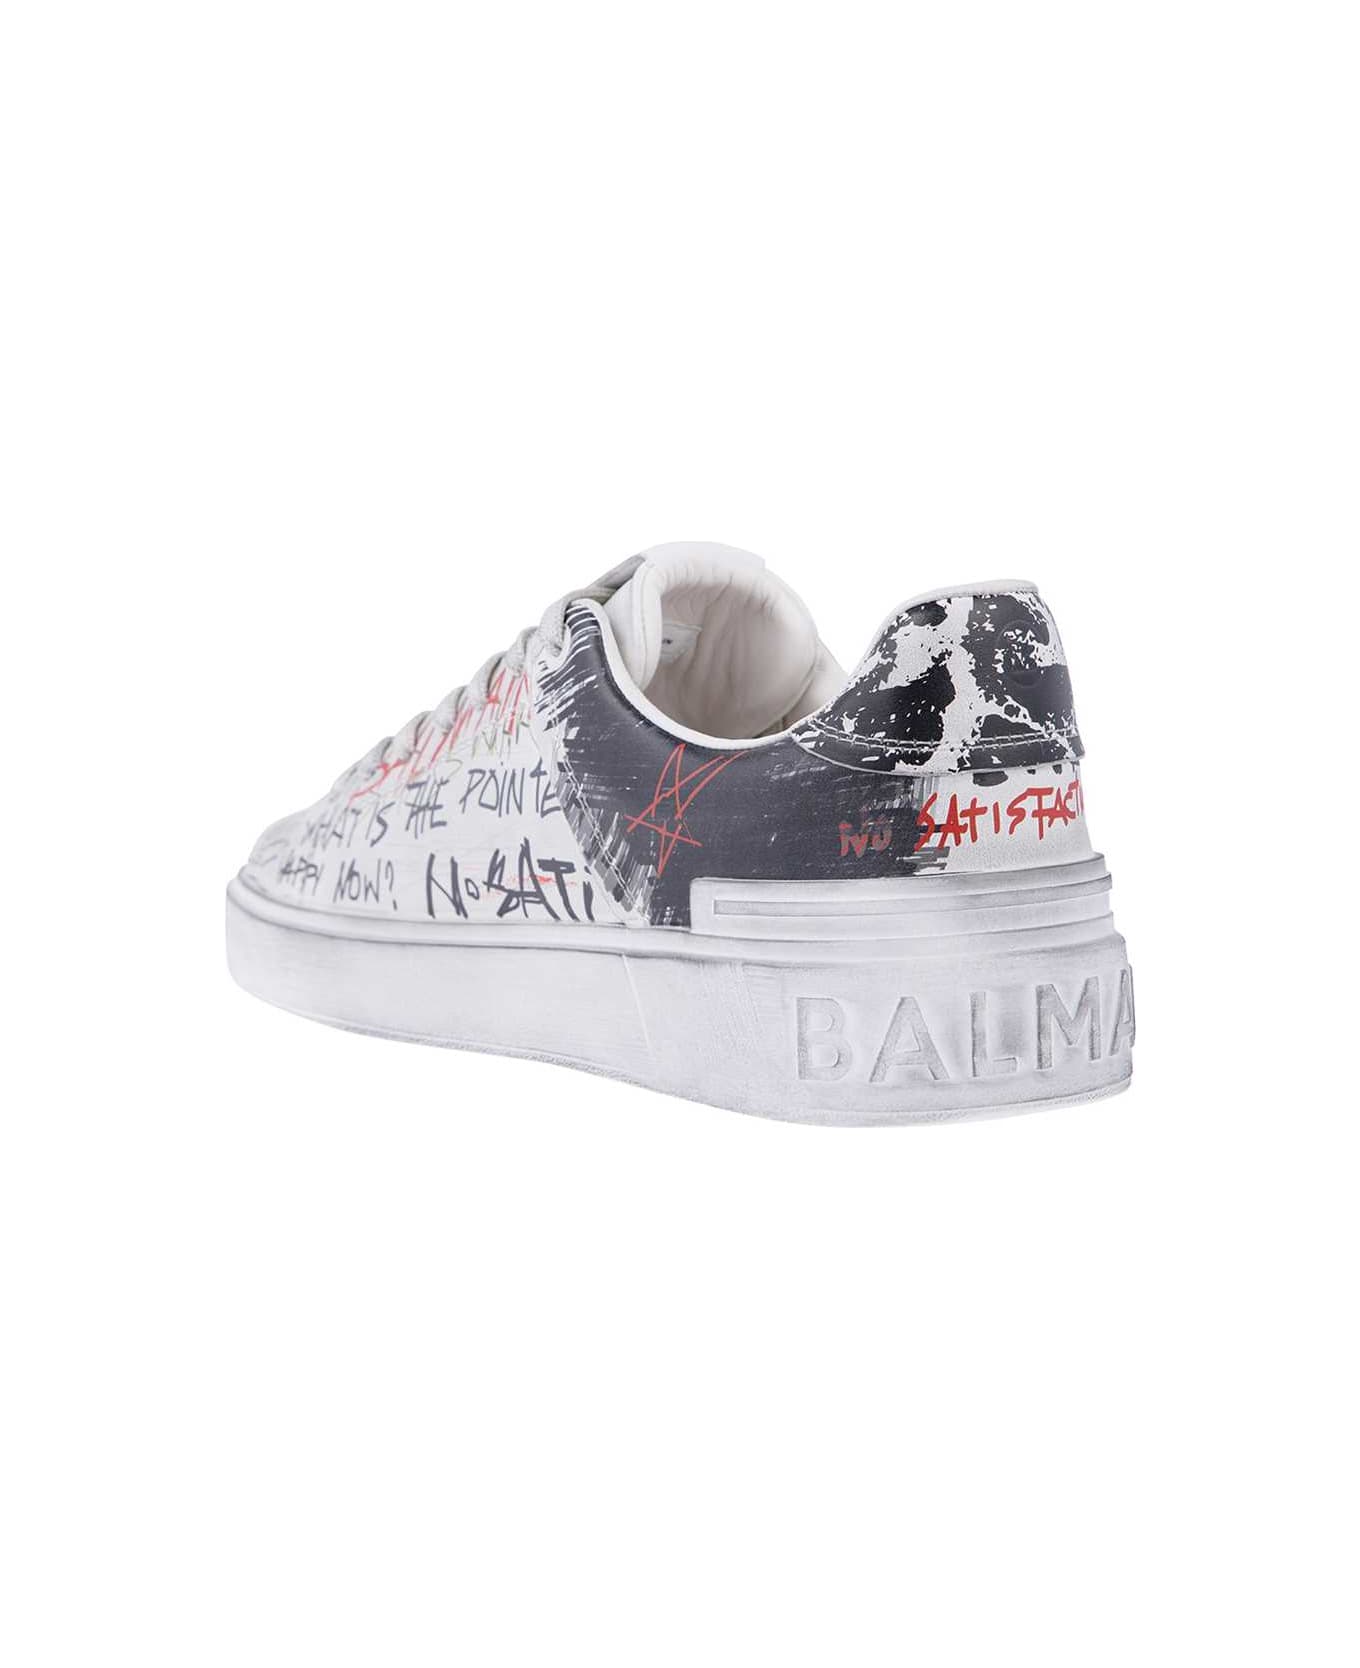 Balmain Leather Low-top Sneakers - White スニーカー